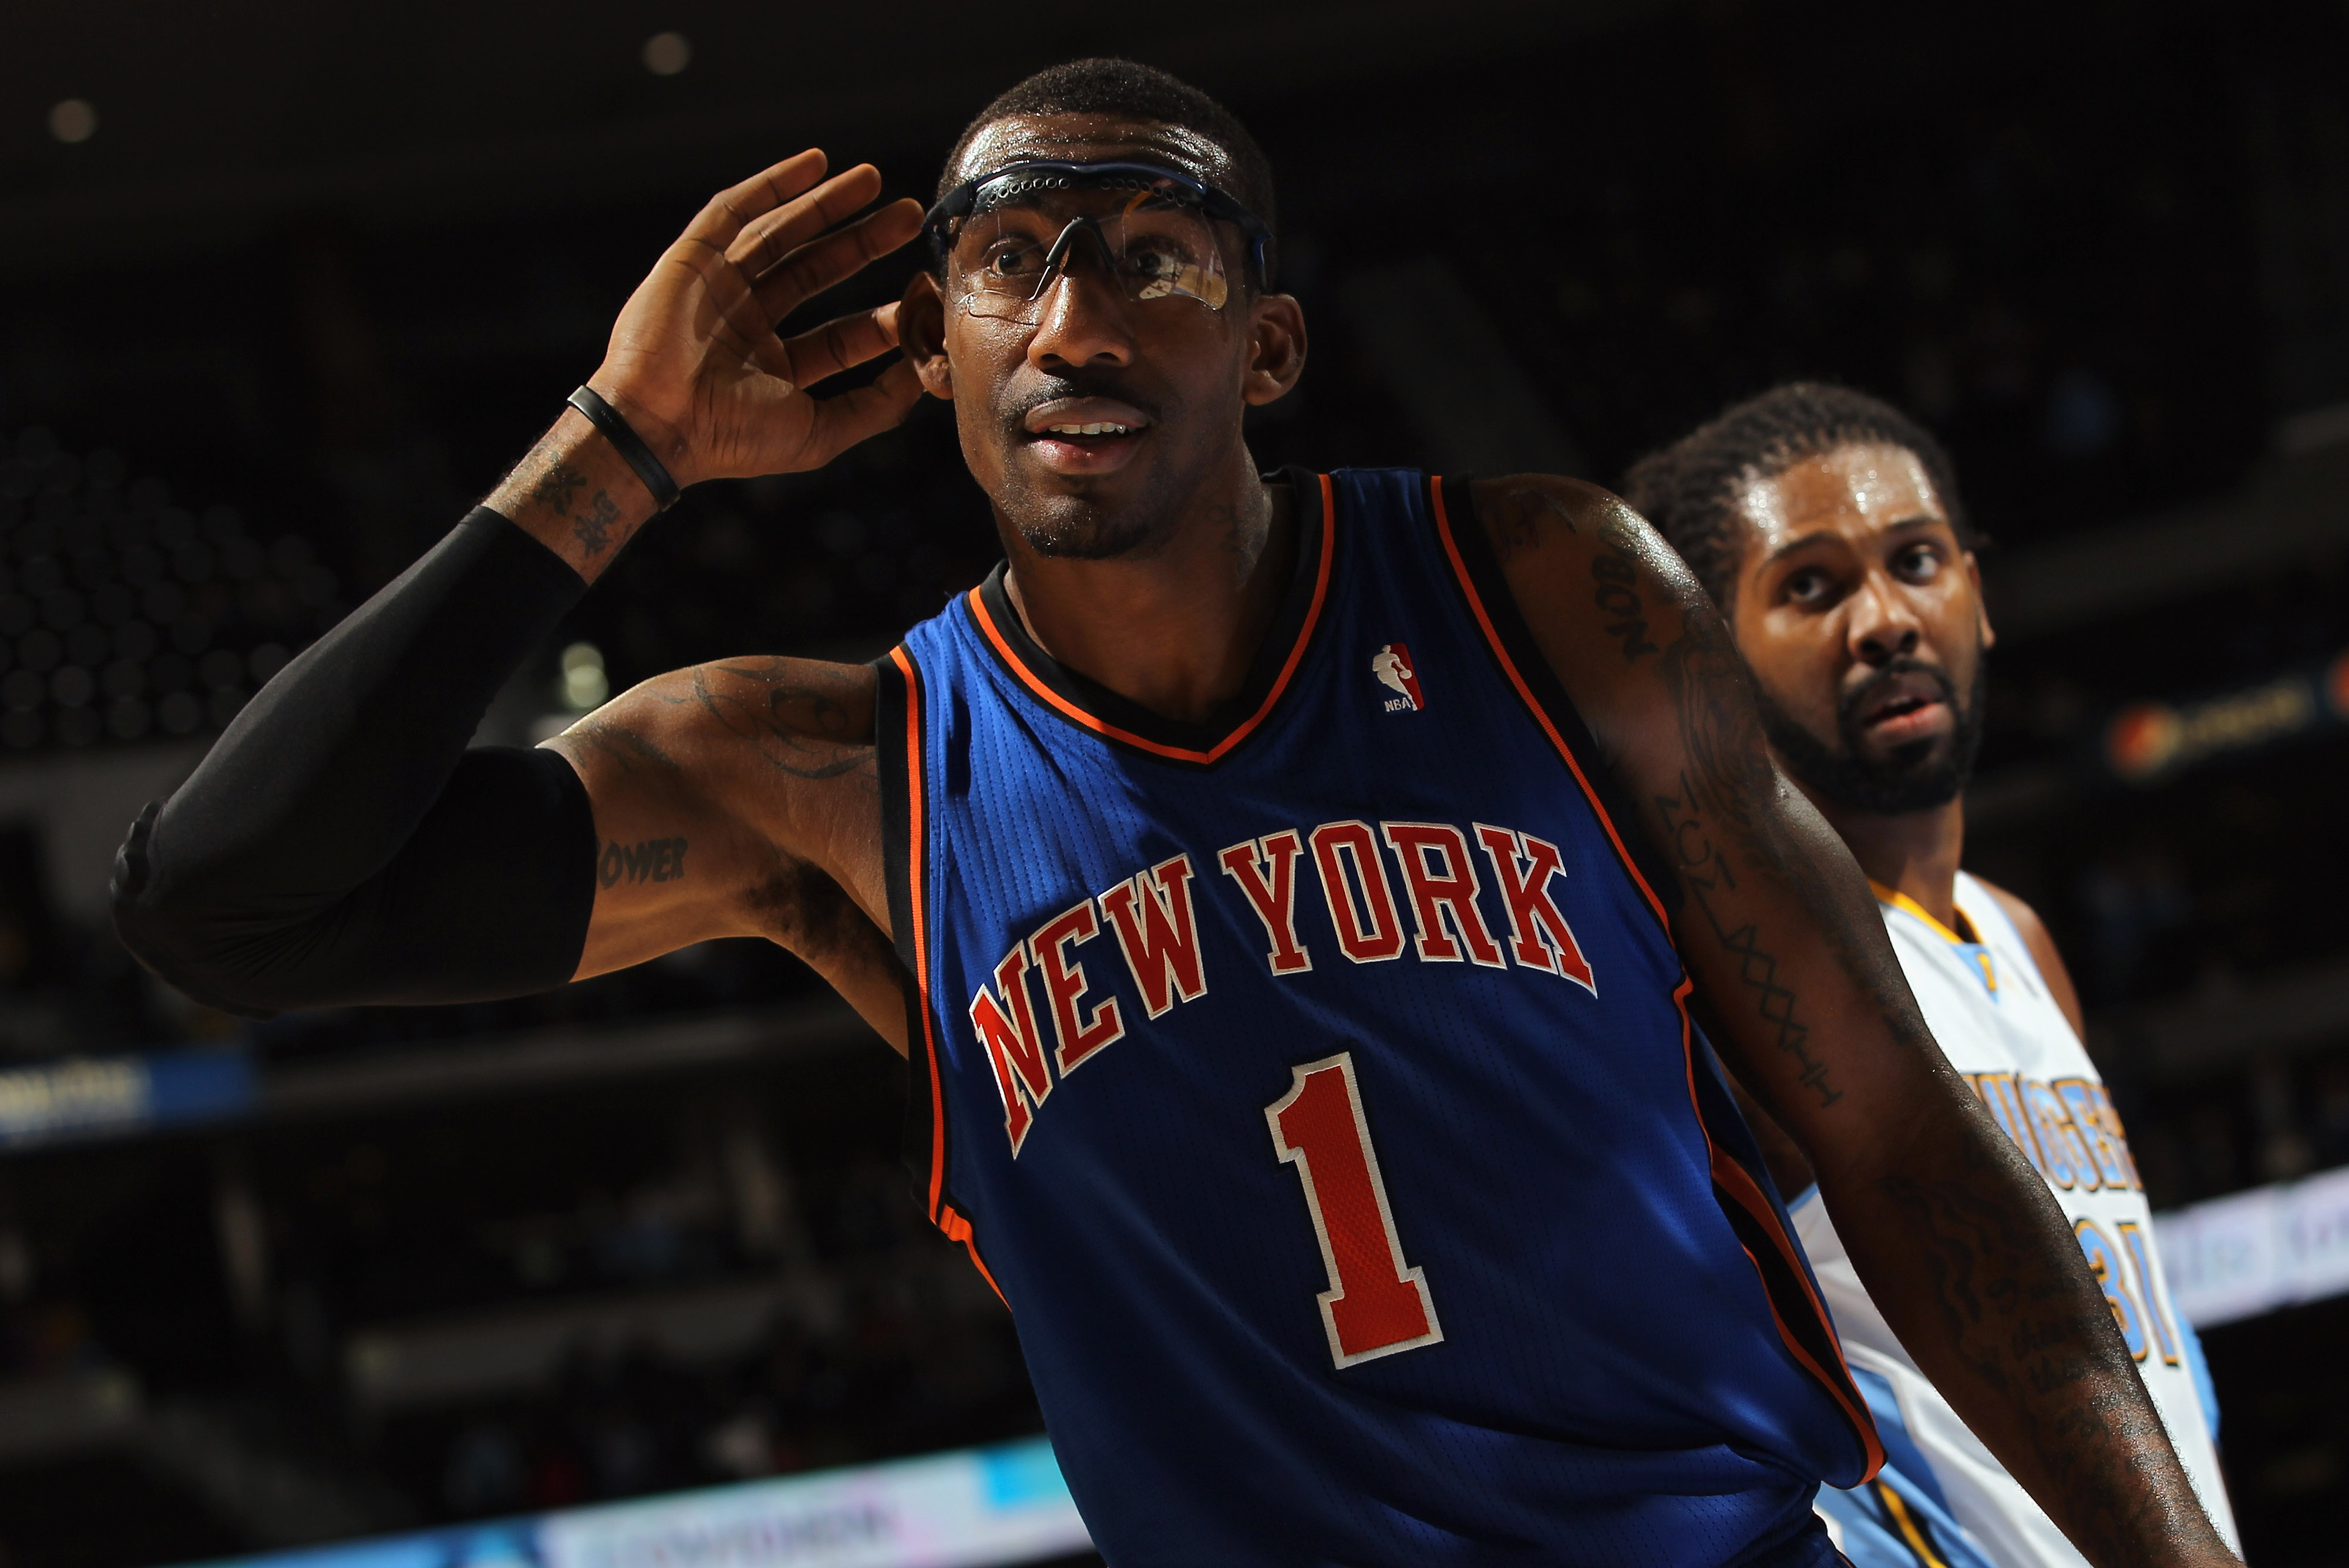 New York Knicks' Amar'e Stoudemire Proving He Can Still Be a Major